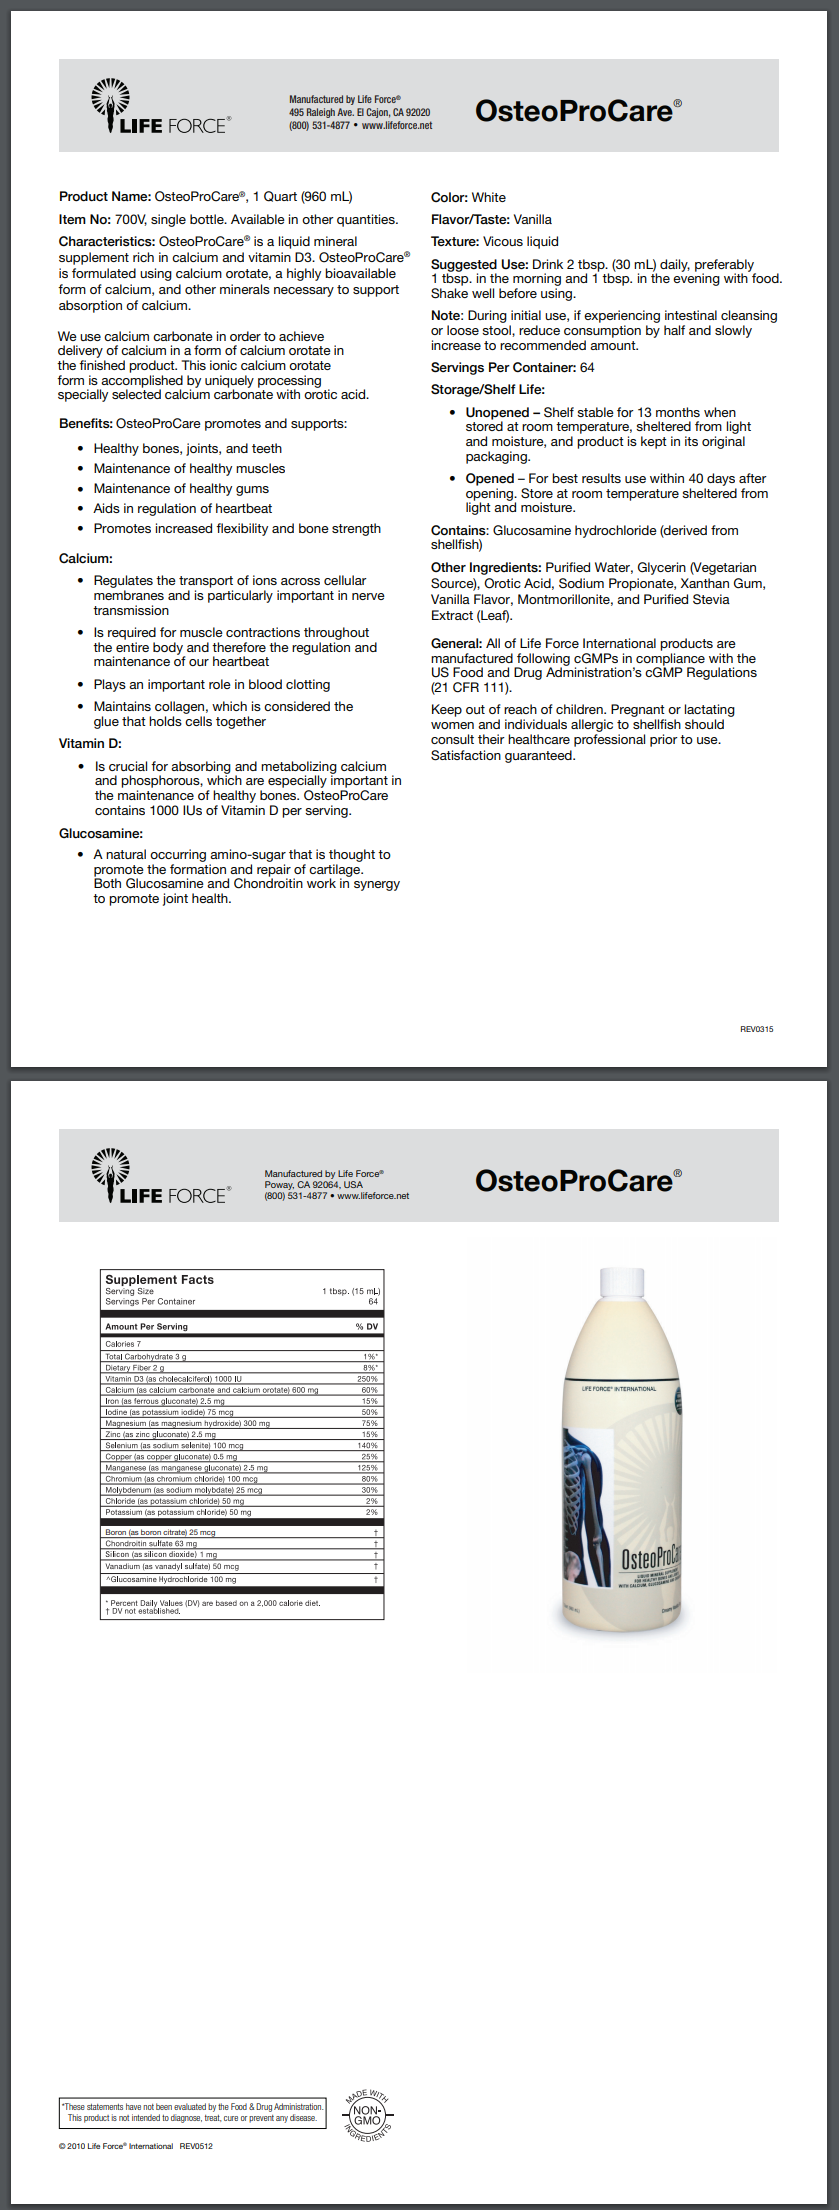 OsteoProCare Product Facts